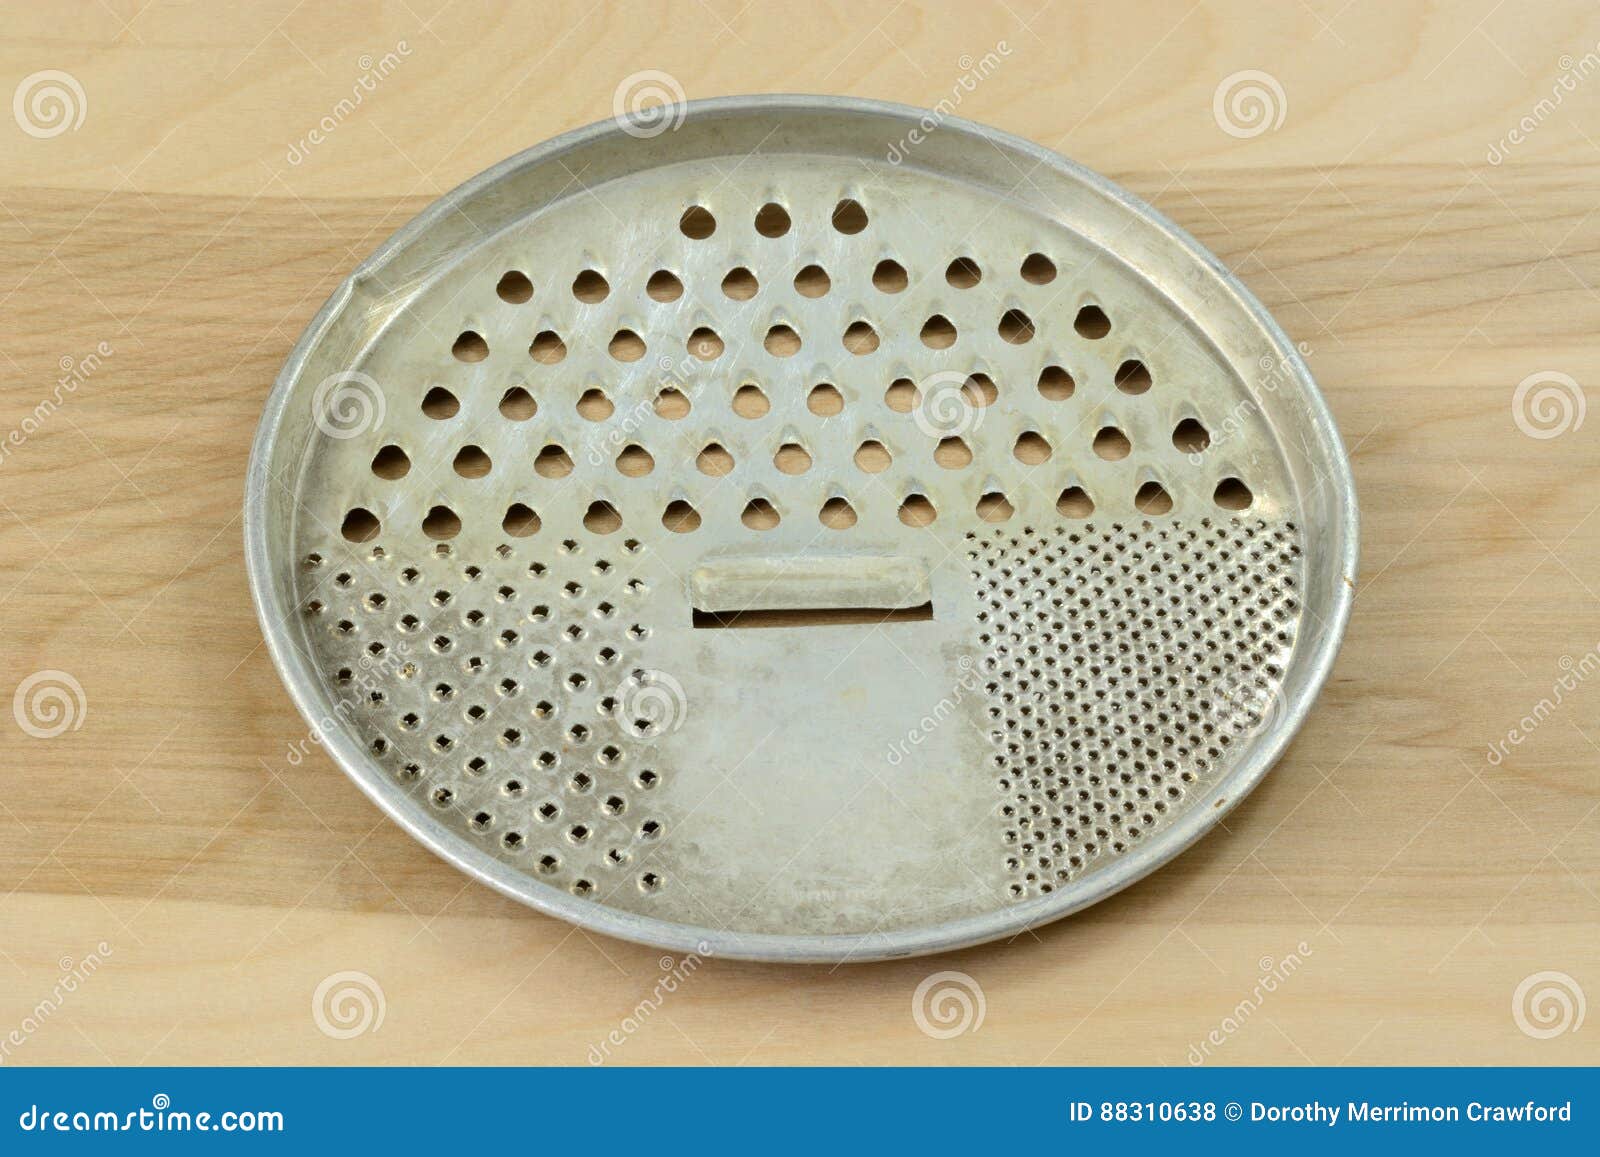 https://thumbs.dreamstime.com/z/antique-retro-flat-round-cheese-grater-different-size-holes-88310638.jpg